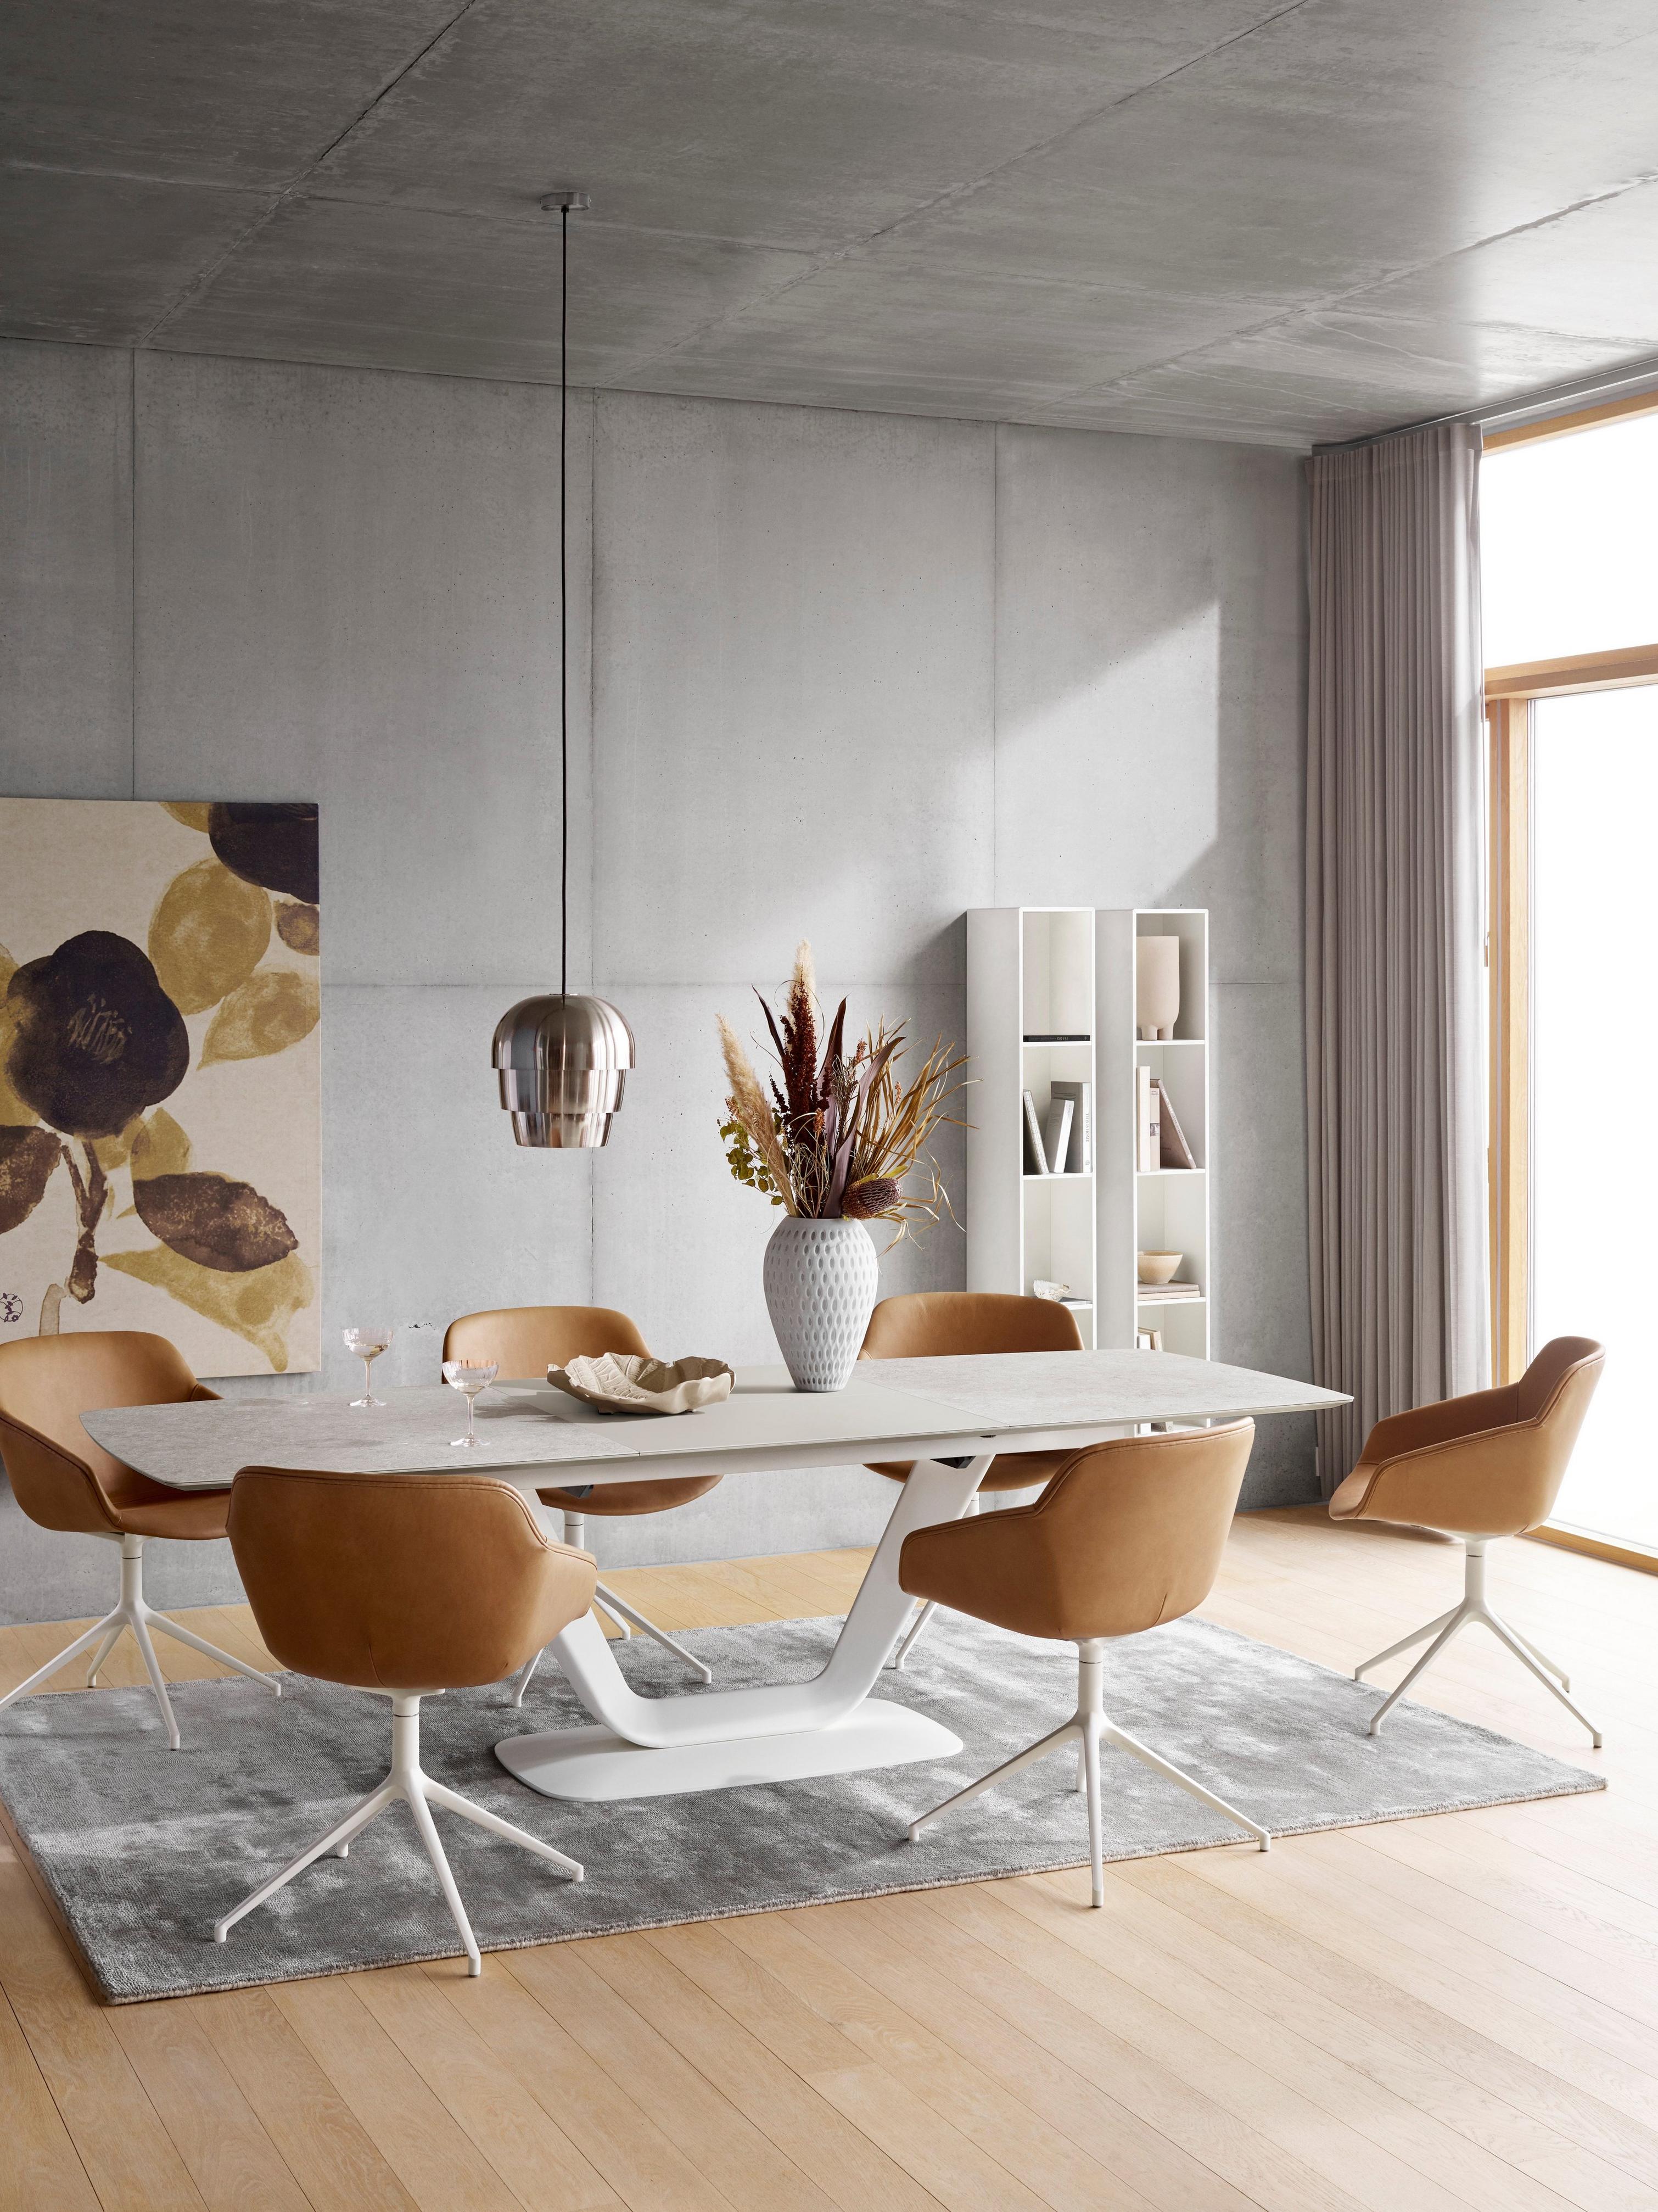 Dining room with tan chairs, white table, pendant light, and gray rug, with art and shelving.